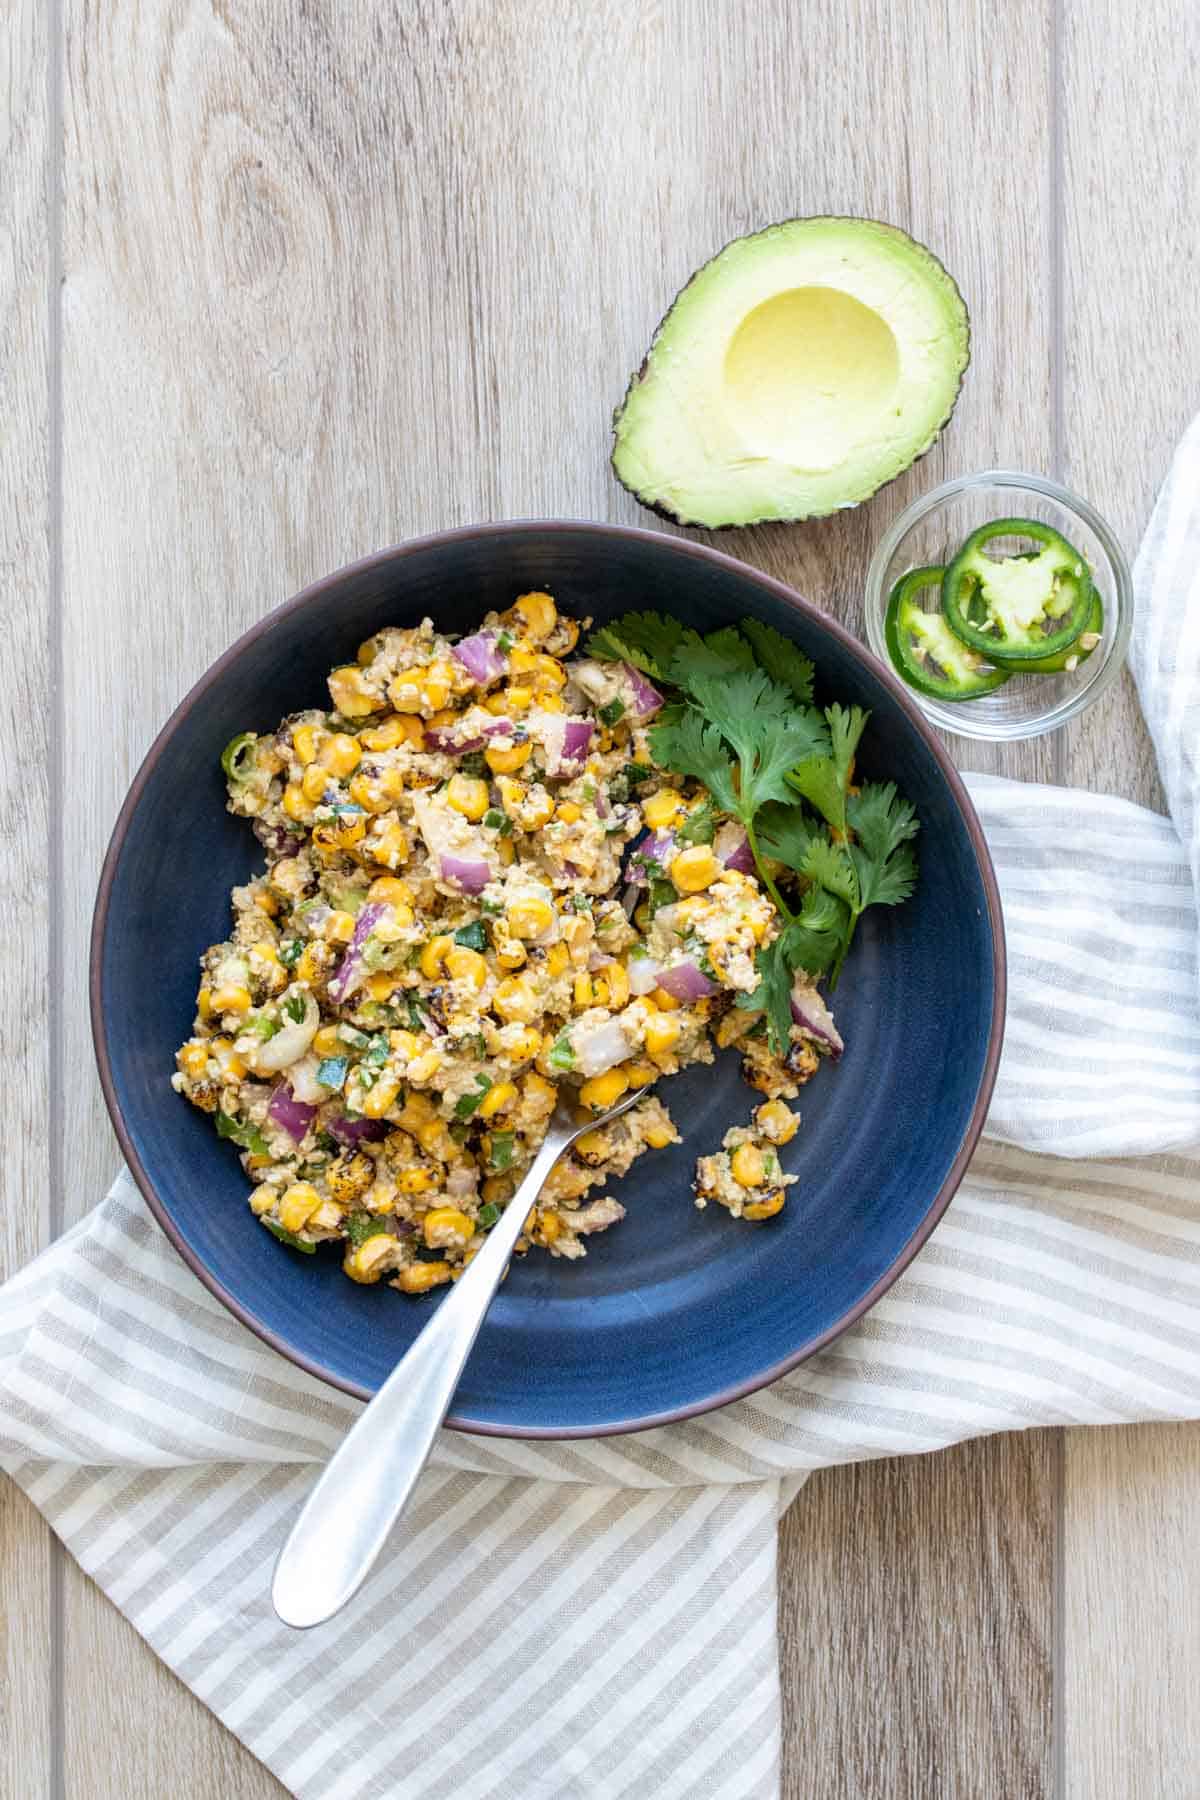 Corn salad with red onion and cilantro in a blue bowl next to avocado and jalapenos.